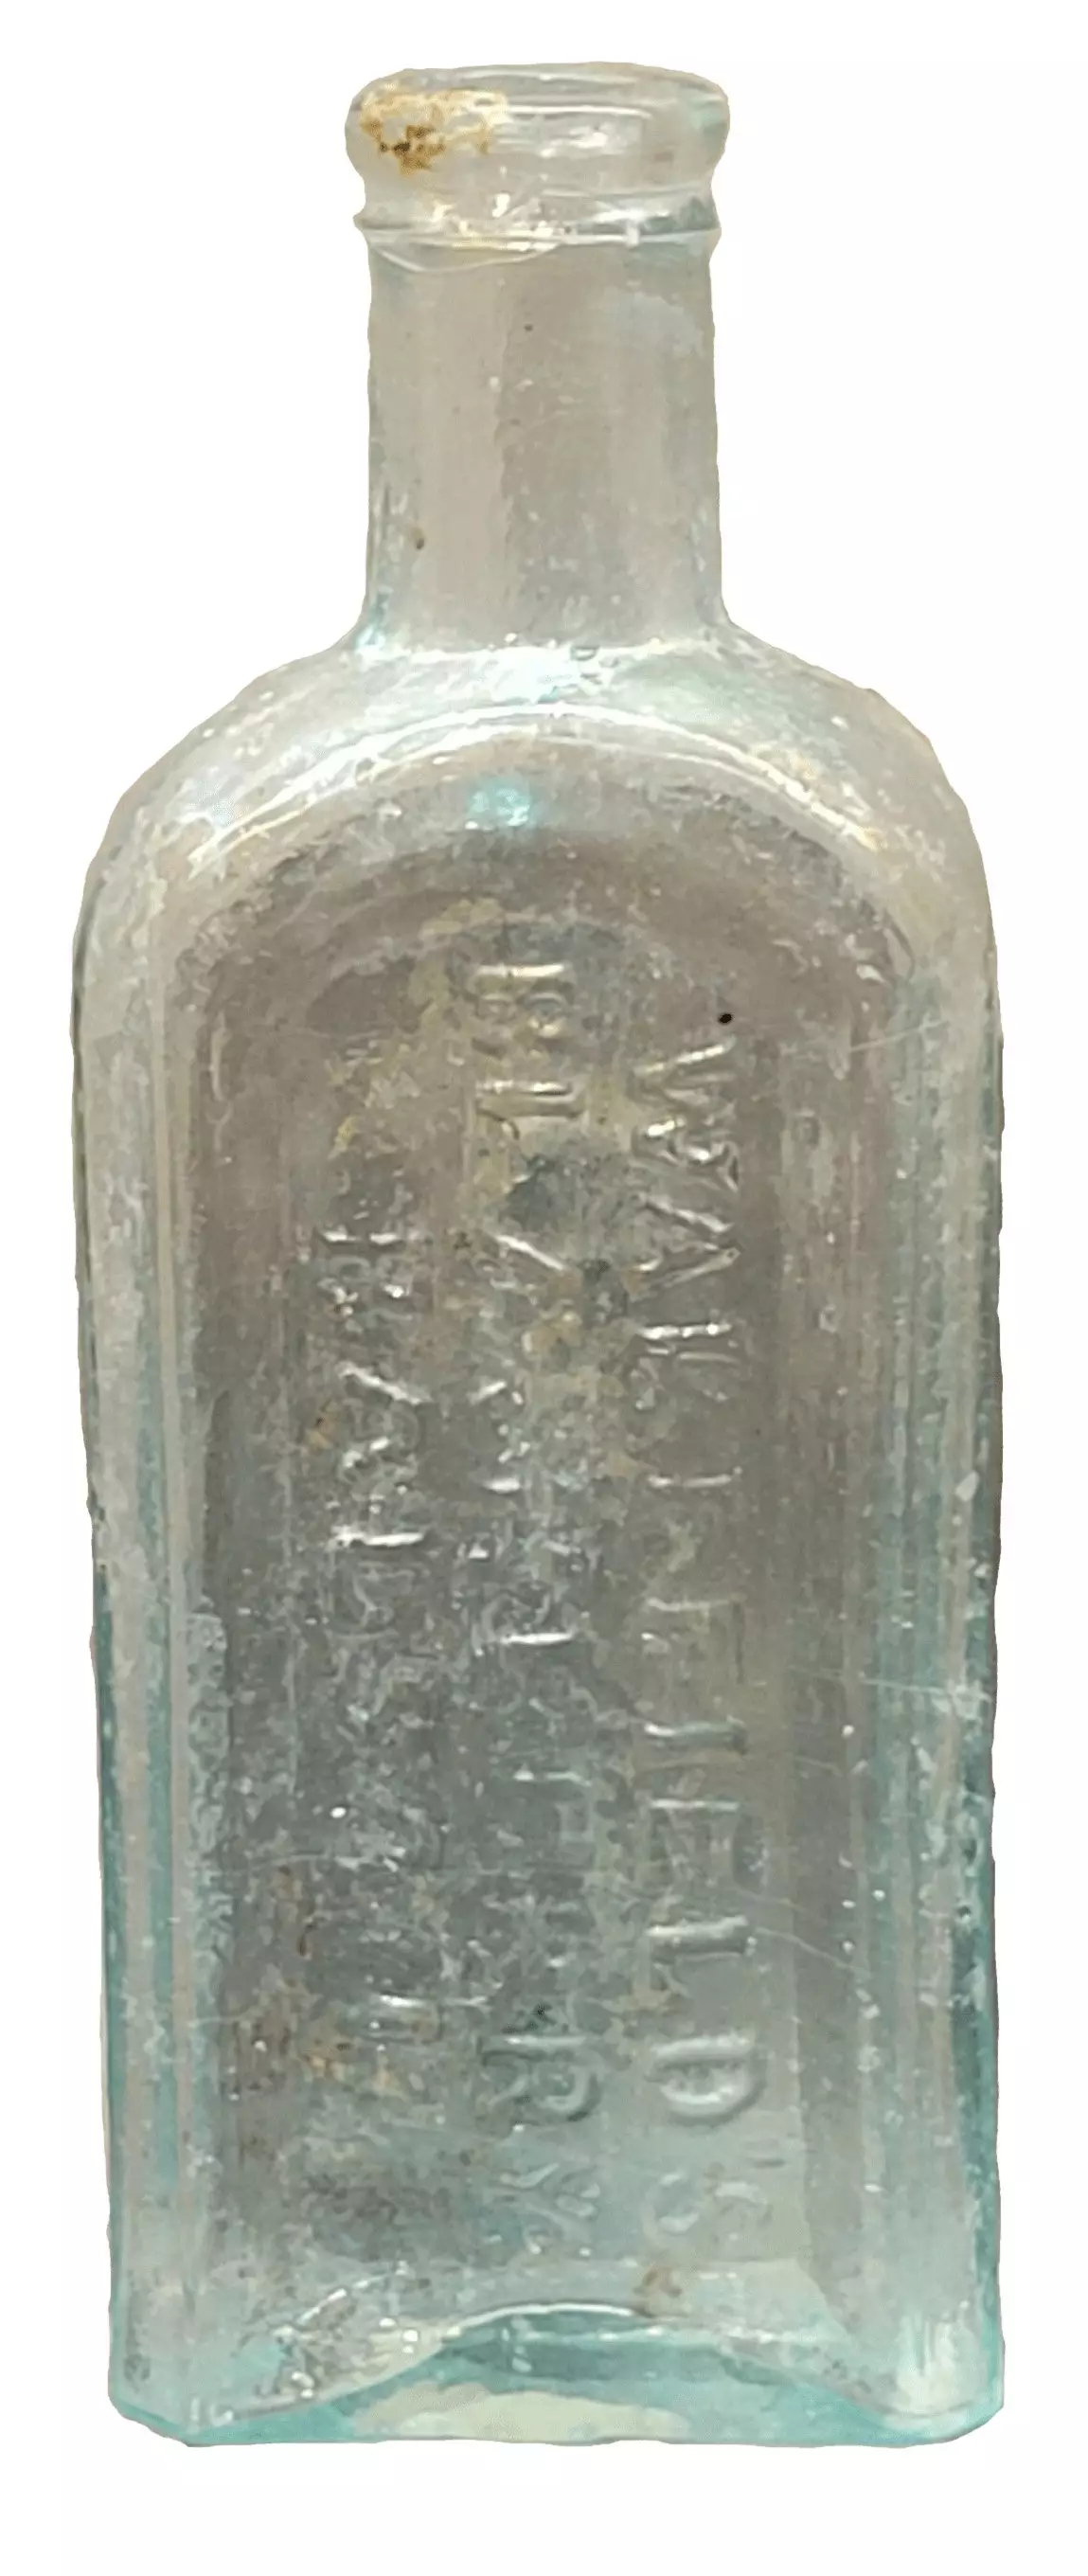 a clear glass bottle with Wakefields imprinted on the glass. No label.